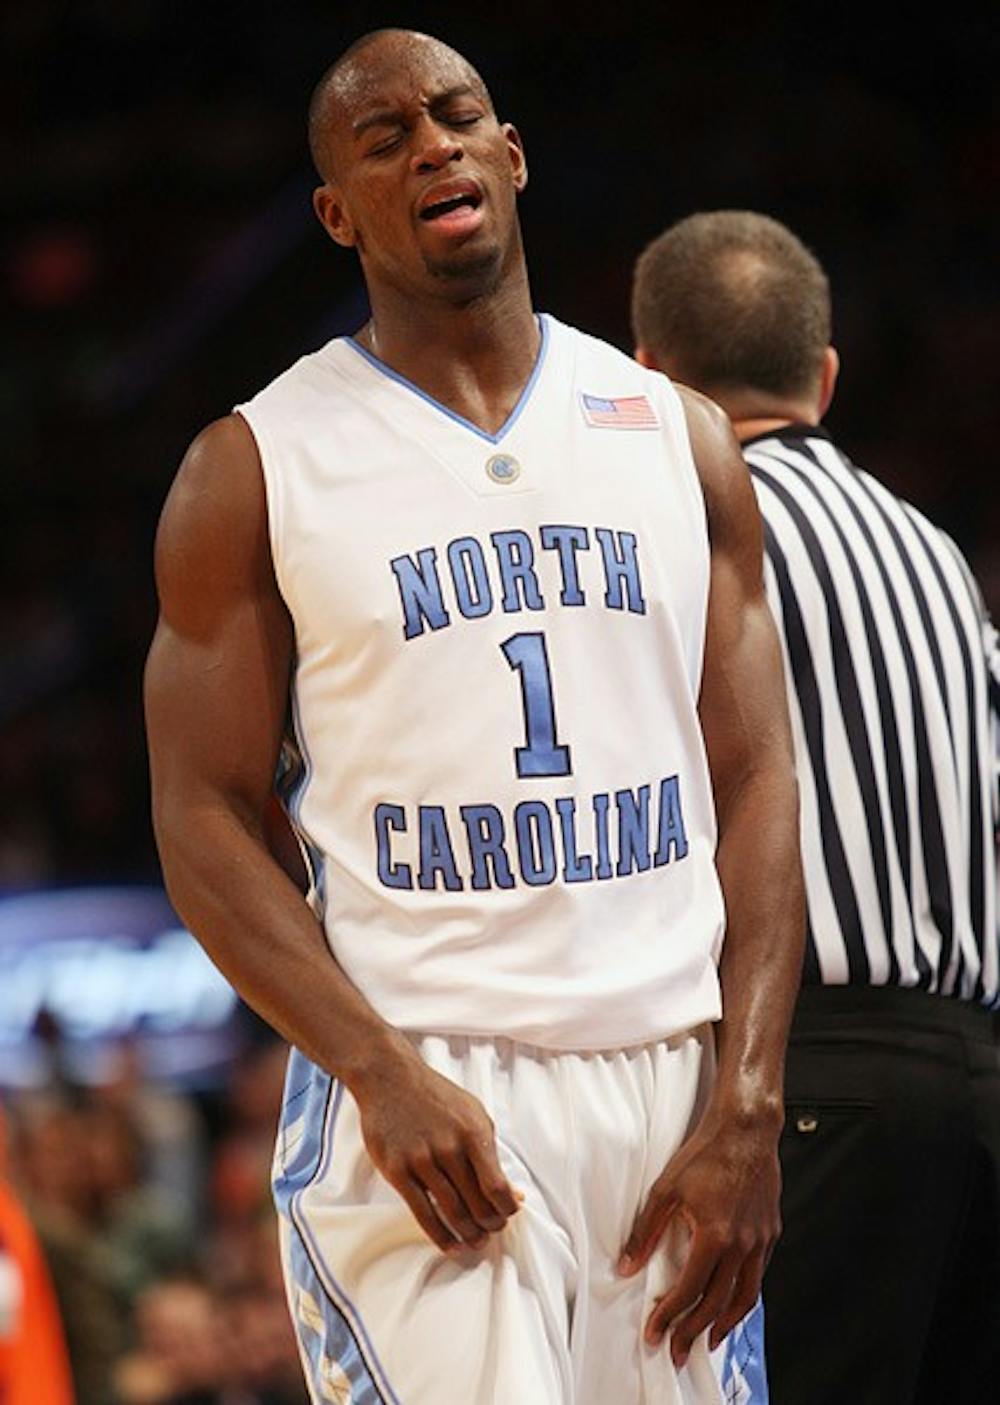 Senior guard Marcus Ginyard expresses frustration during UNC's 87-71 loss in Madison Square Garden. DTH/Andrew Johnson